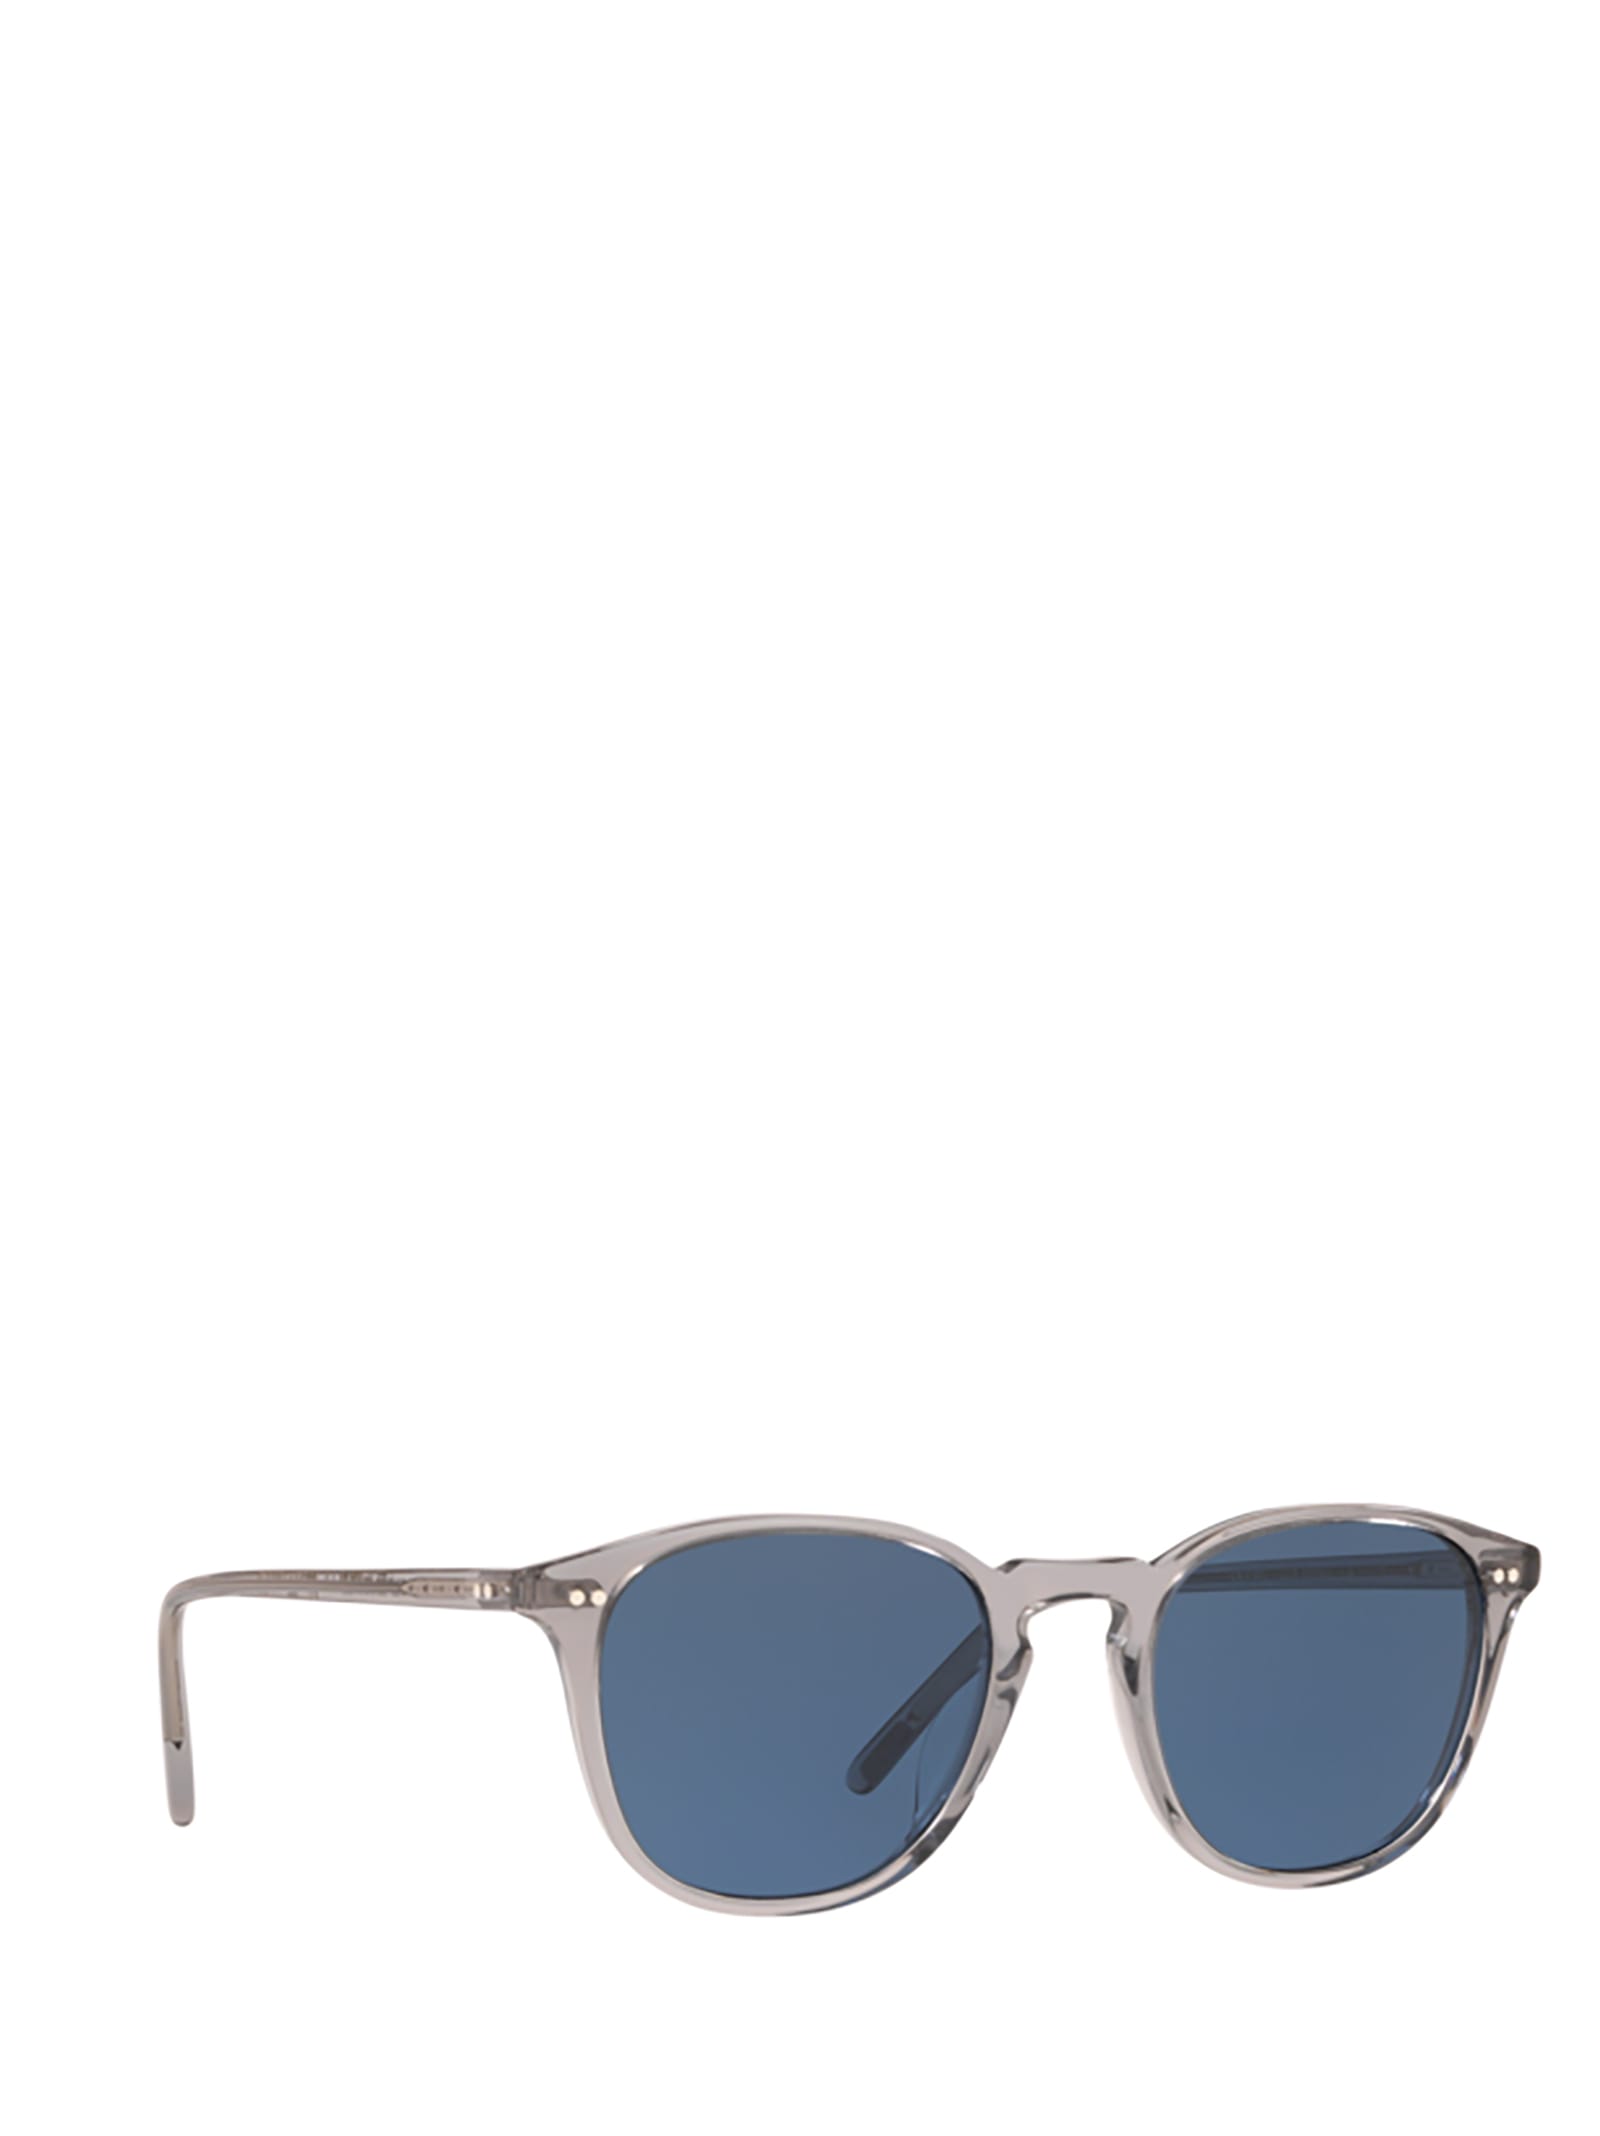 Oliver Peoples Forman Square Polarized Sunglasses In Grey | ModeSens